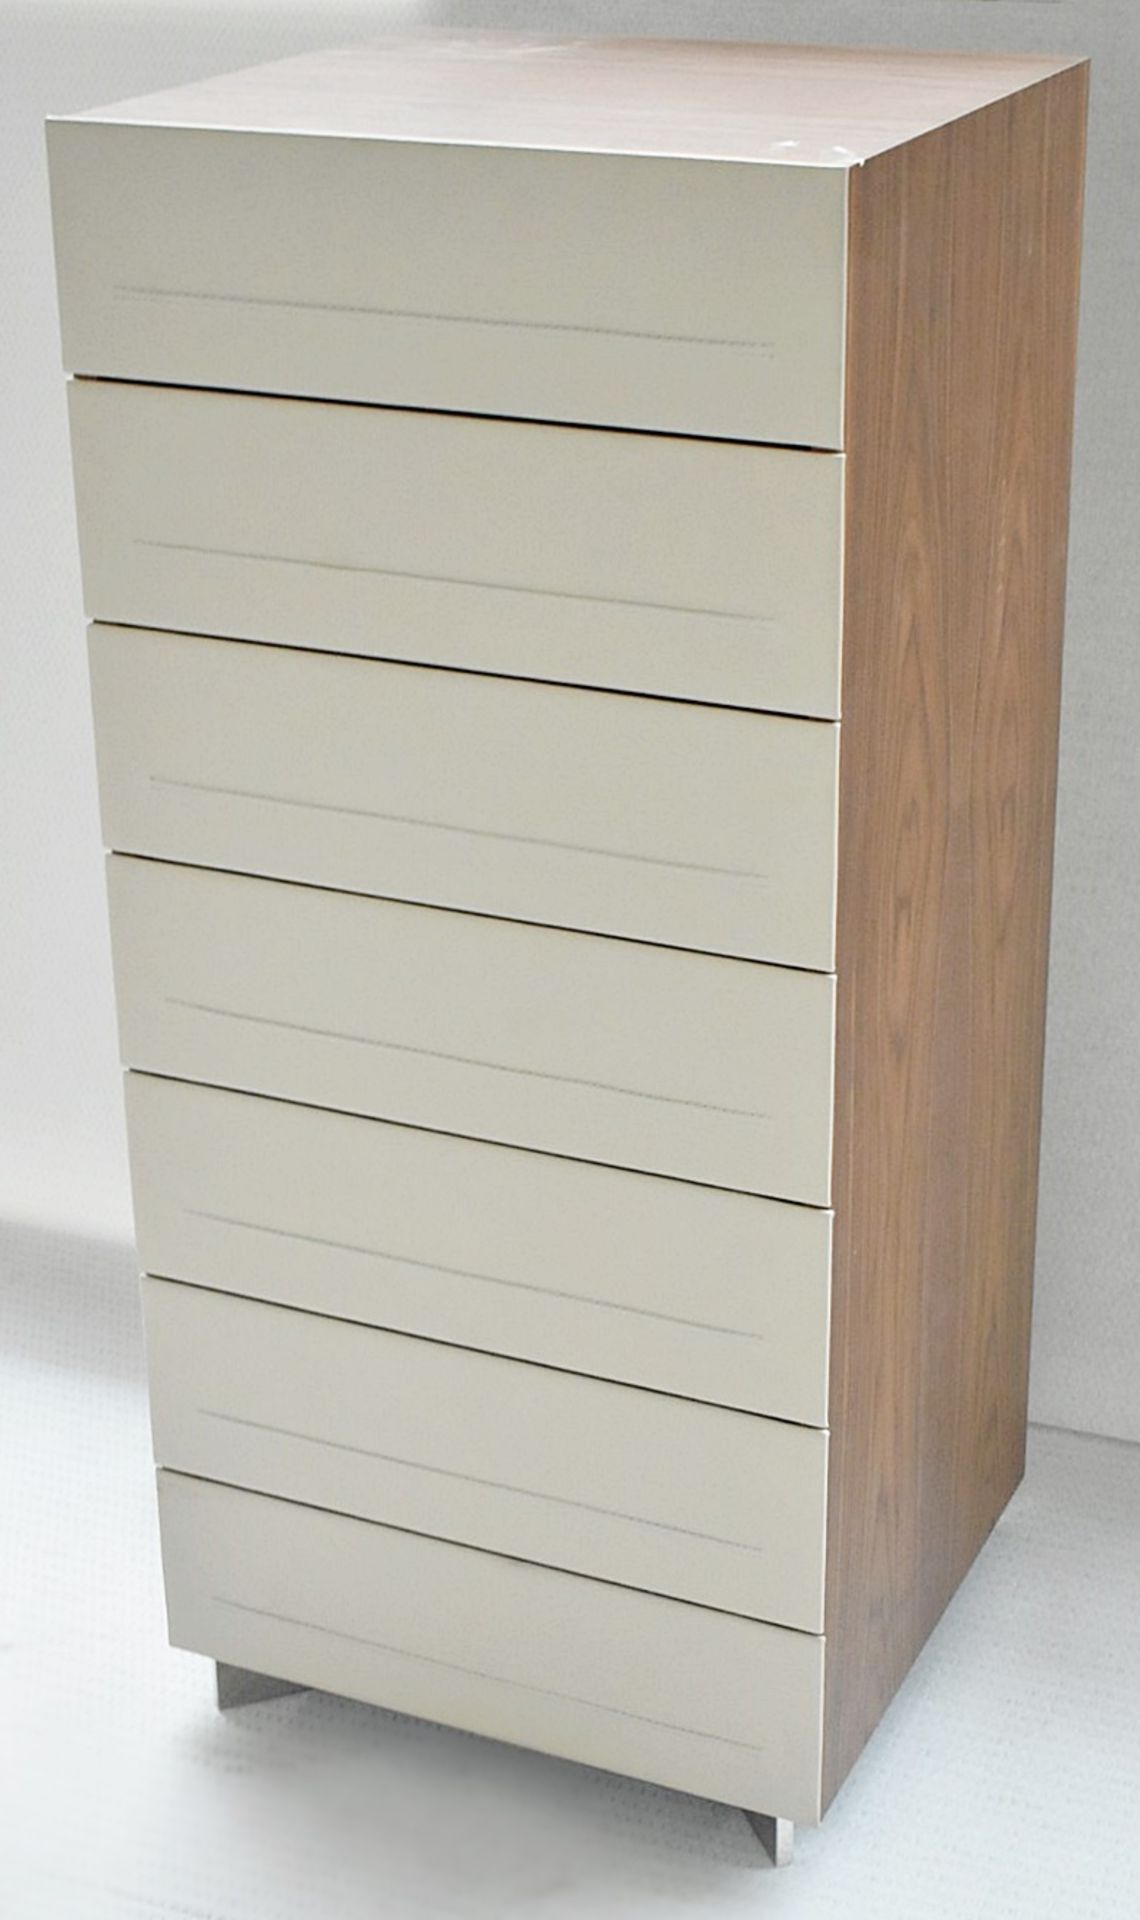 1 x CATTELAN ITALIA Dyno Luxury Italian Leather Fronted 7-Drawer Tall Chest - Original Price £4,000 - Image 2 of 7